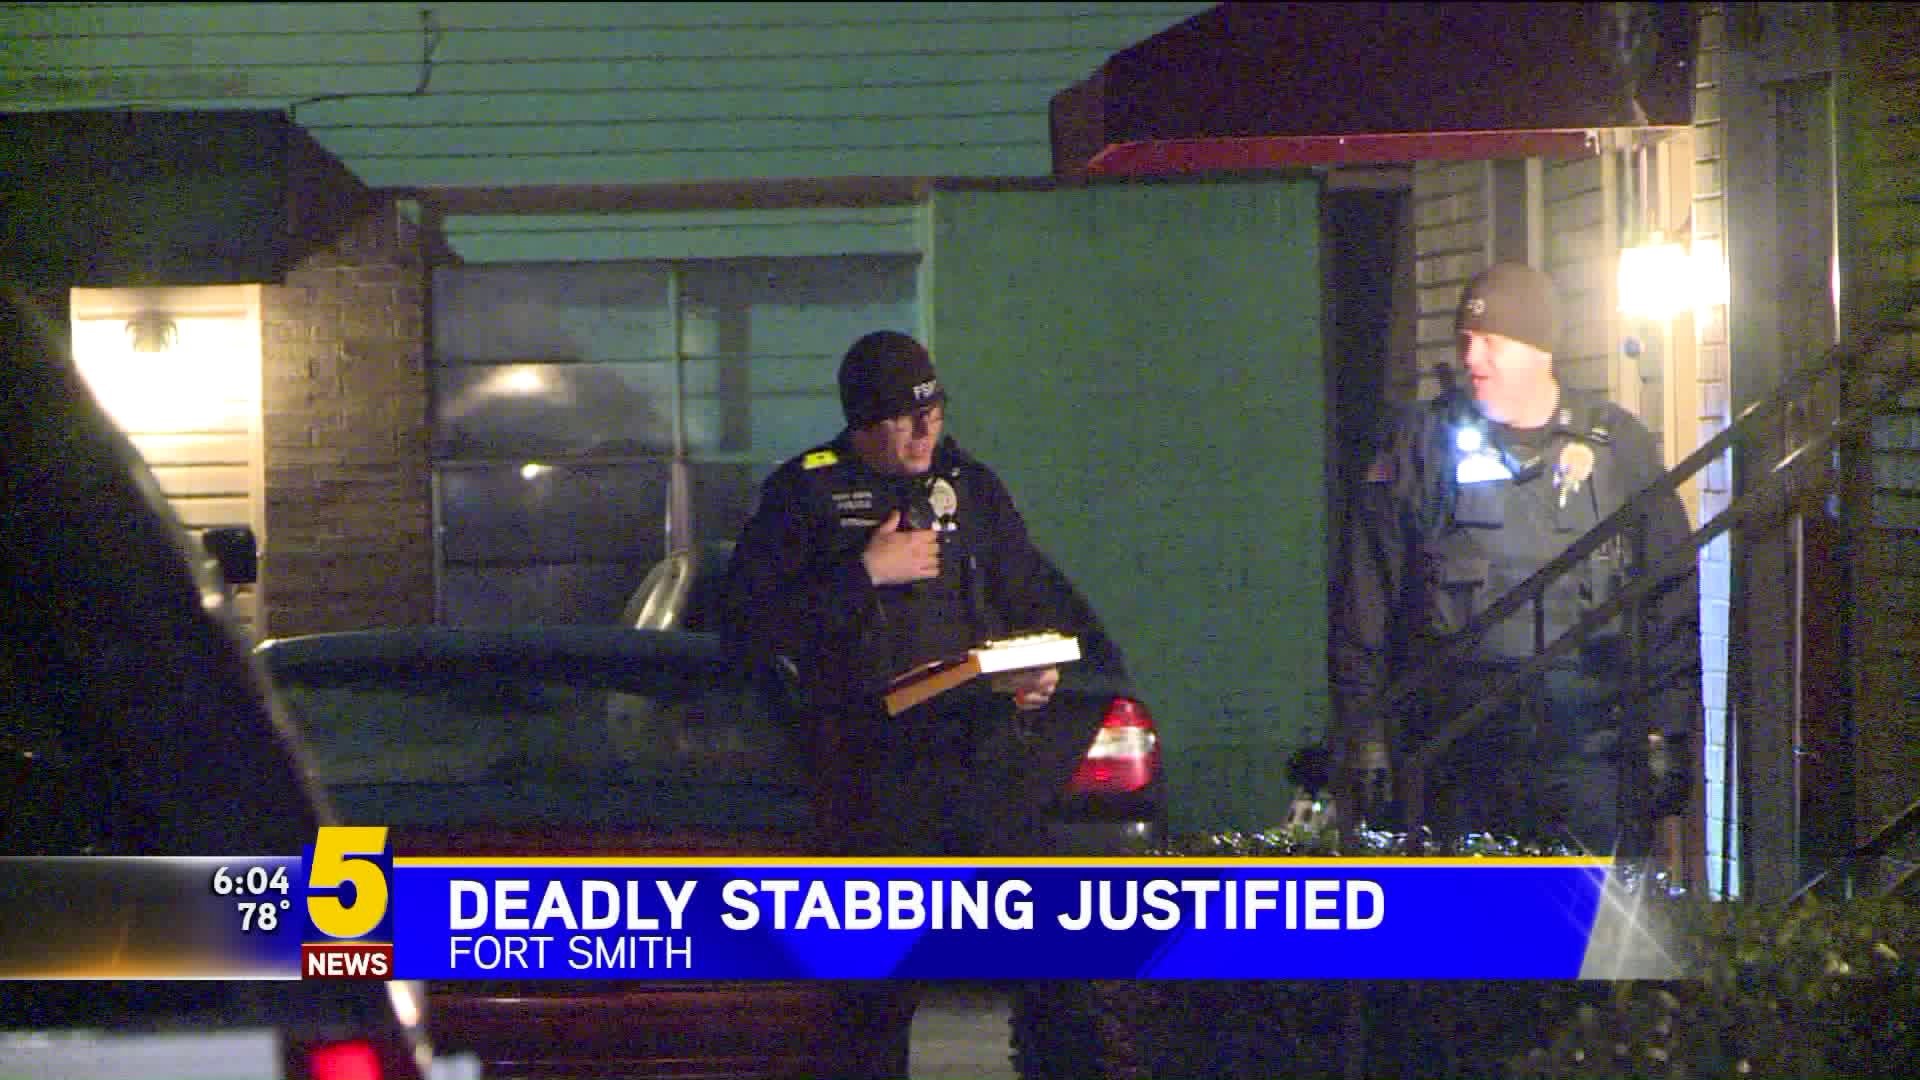 Fort Smith Deadly Stabbing Justified